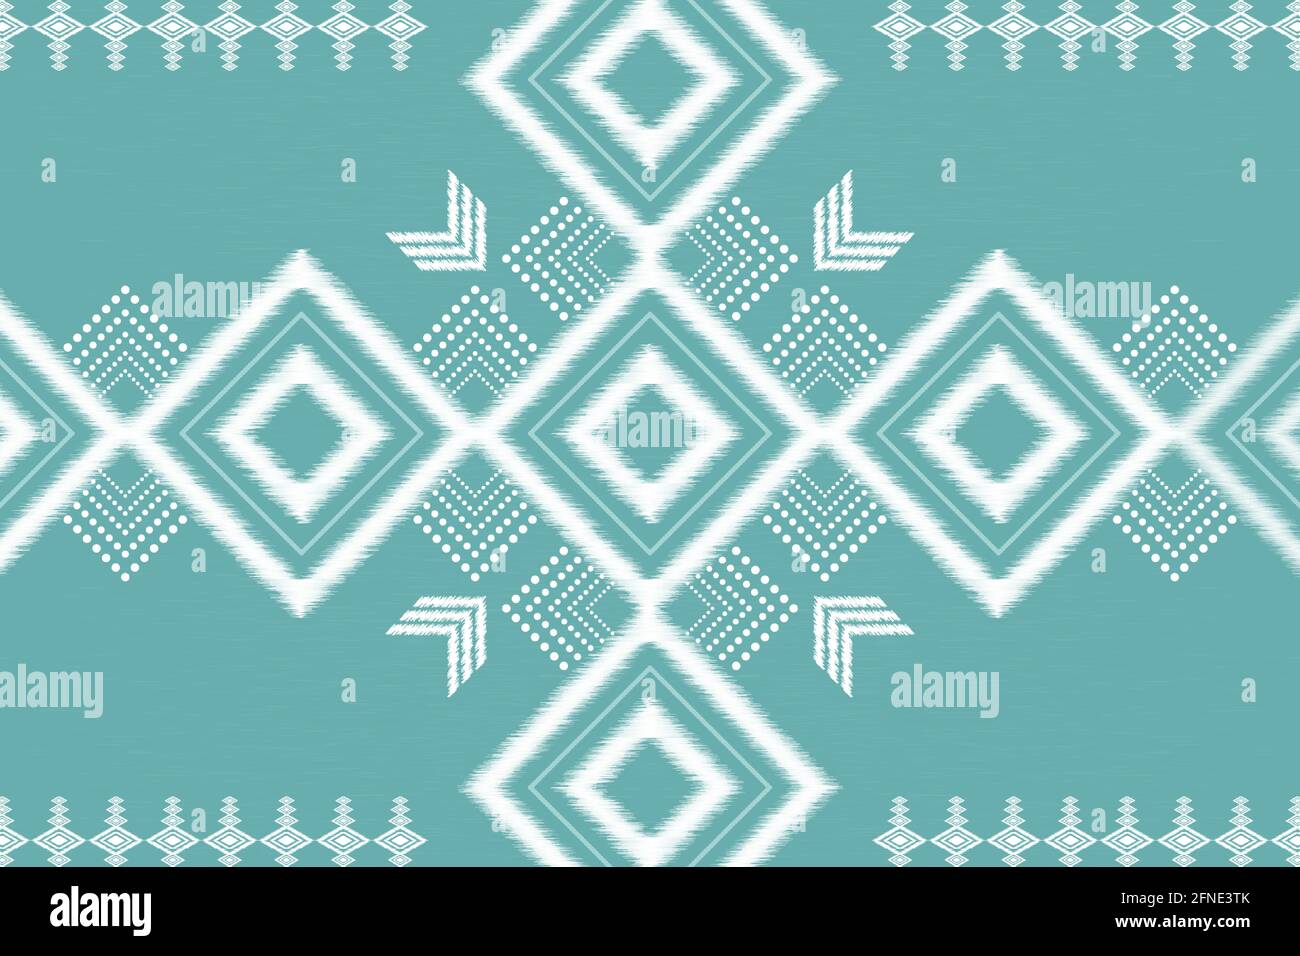 Geometric ethnic oriental ikat seamless pattern traditional design for background,carpet,wallpaper,clothing,wrapping,batik,fabric.Embroidery style Stock Vector